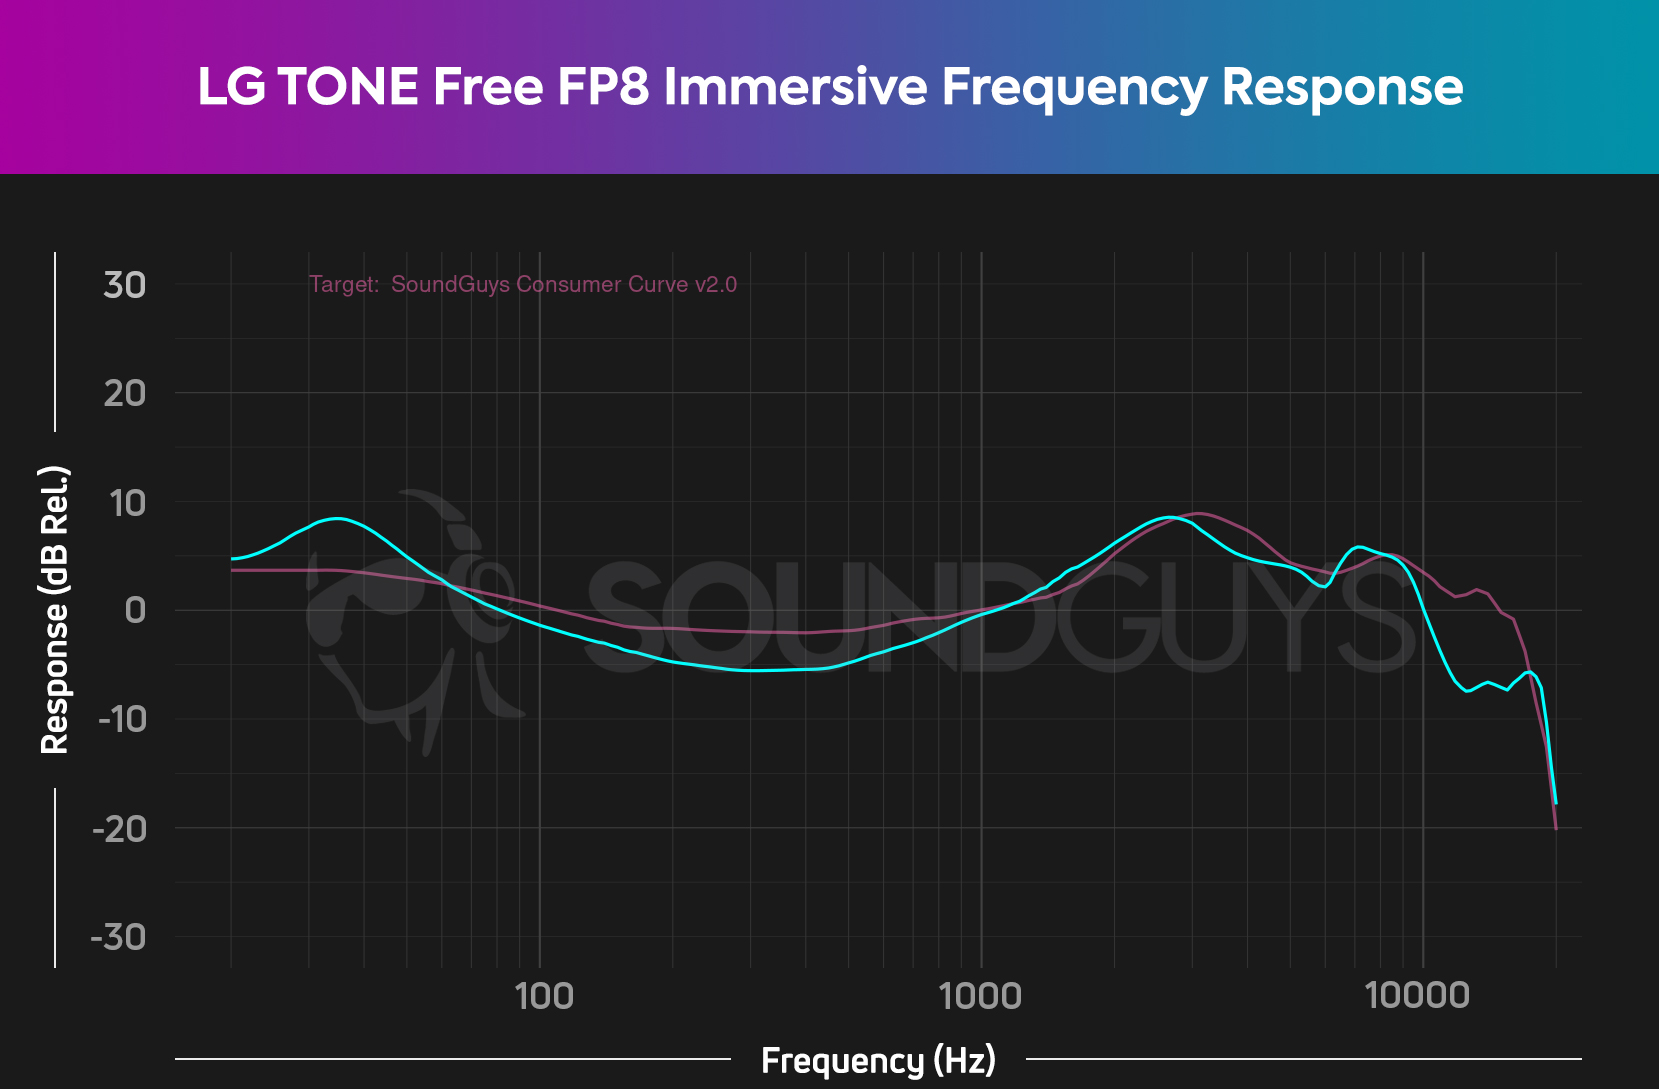 The Immersive preset frequency response for the LG TONE Free FP8 against our house curve.